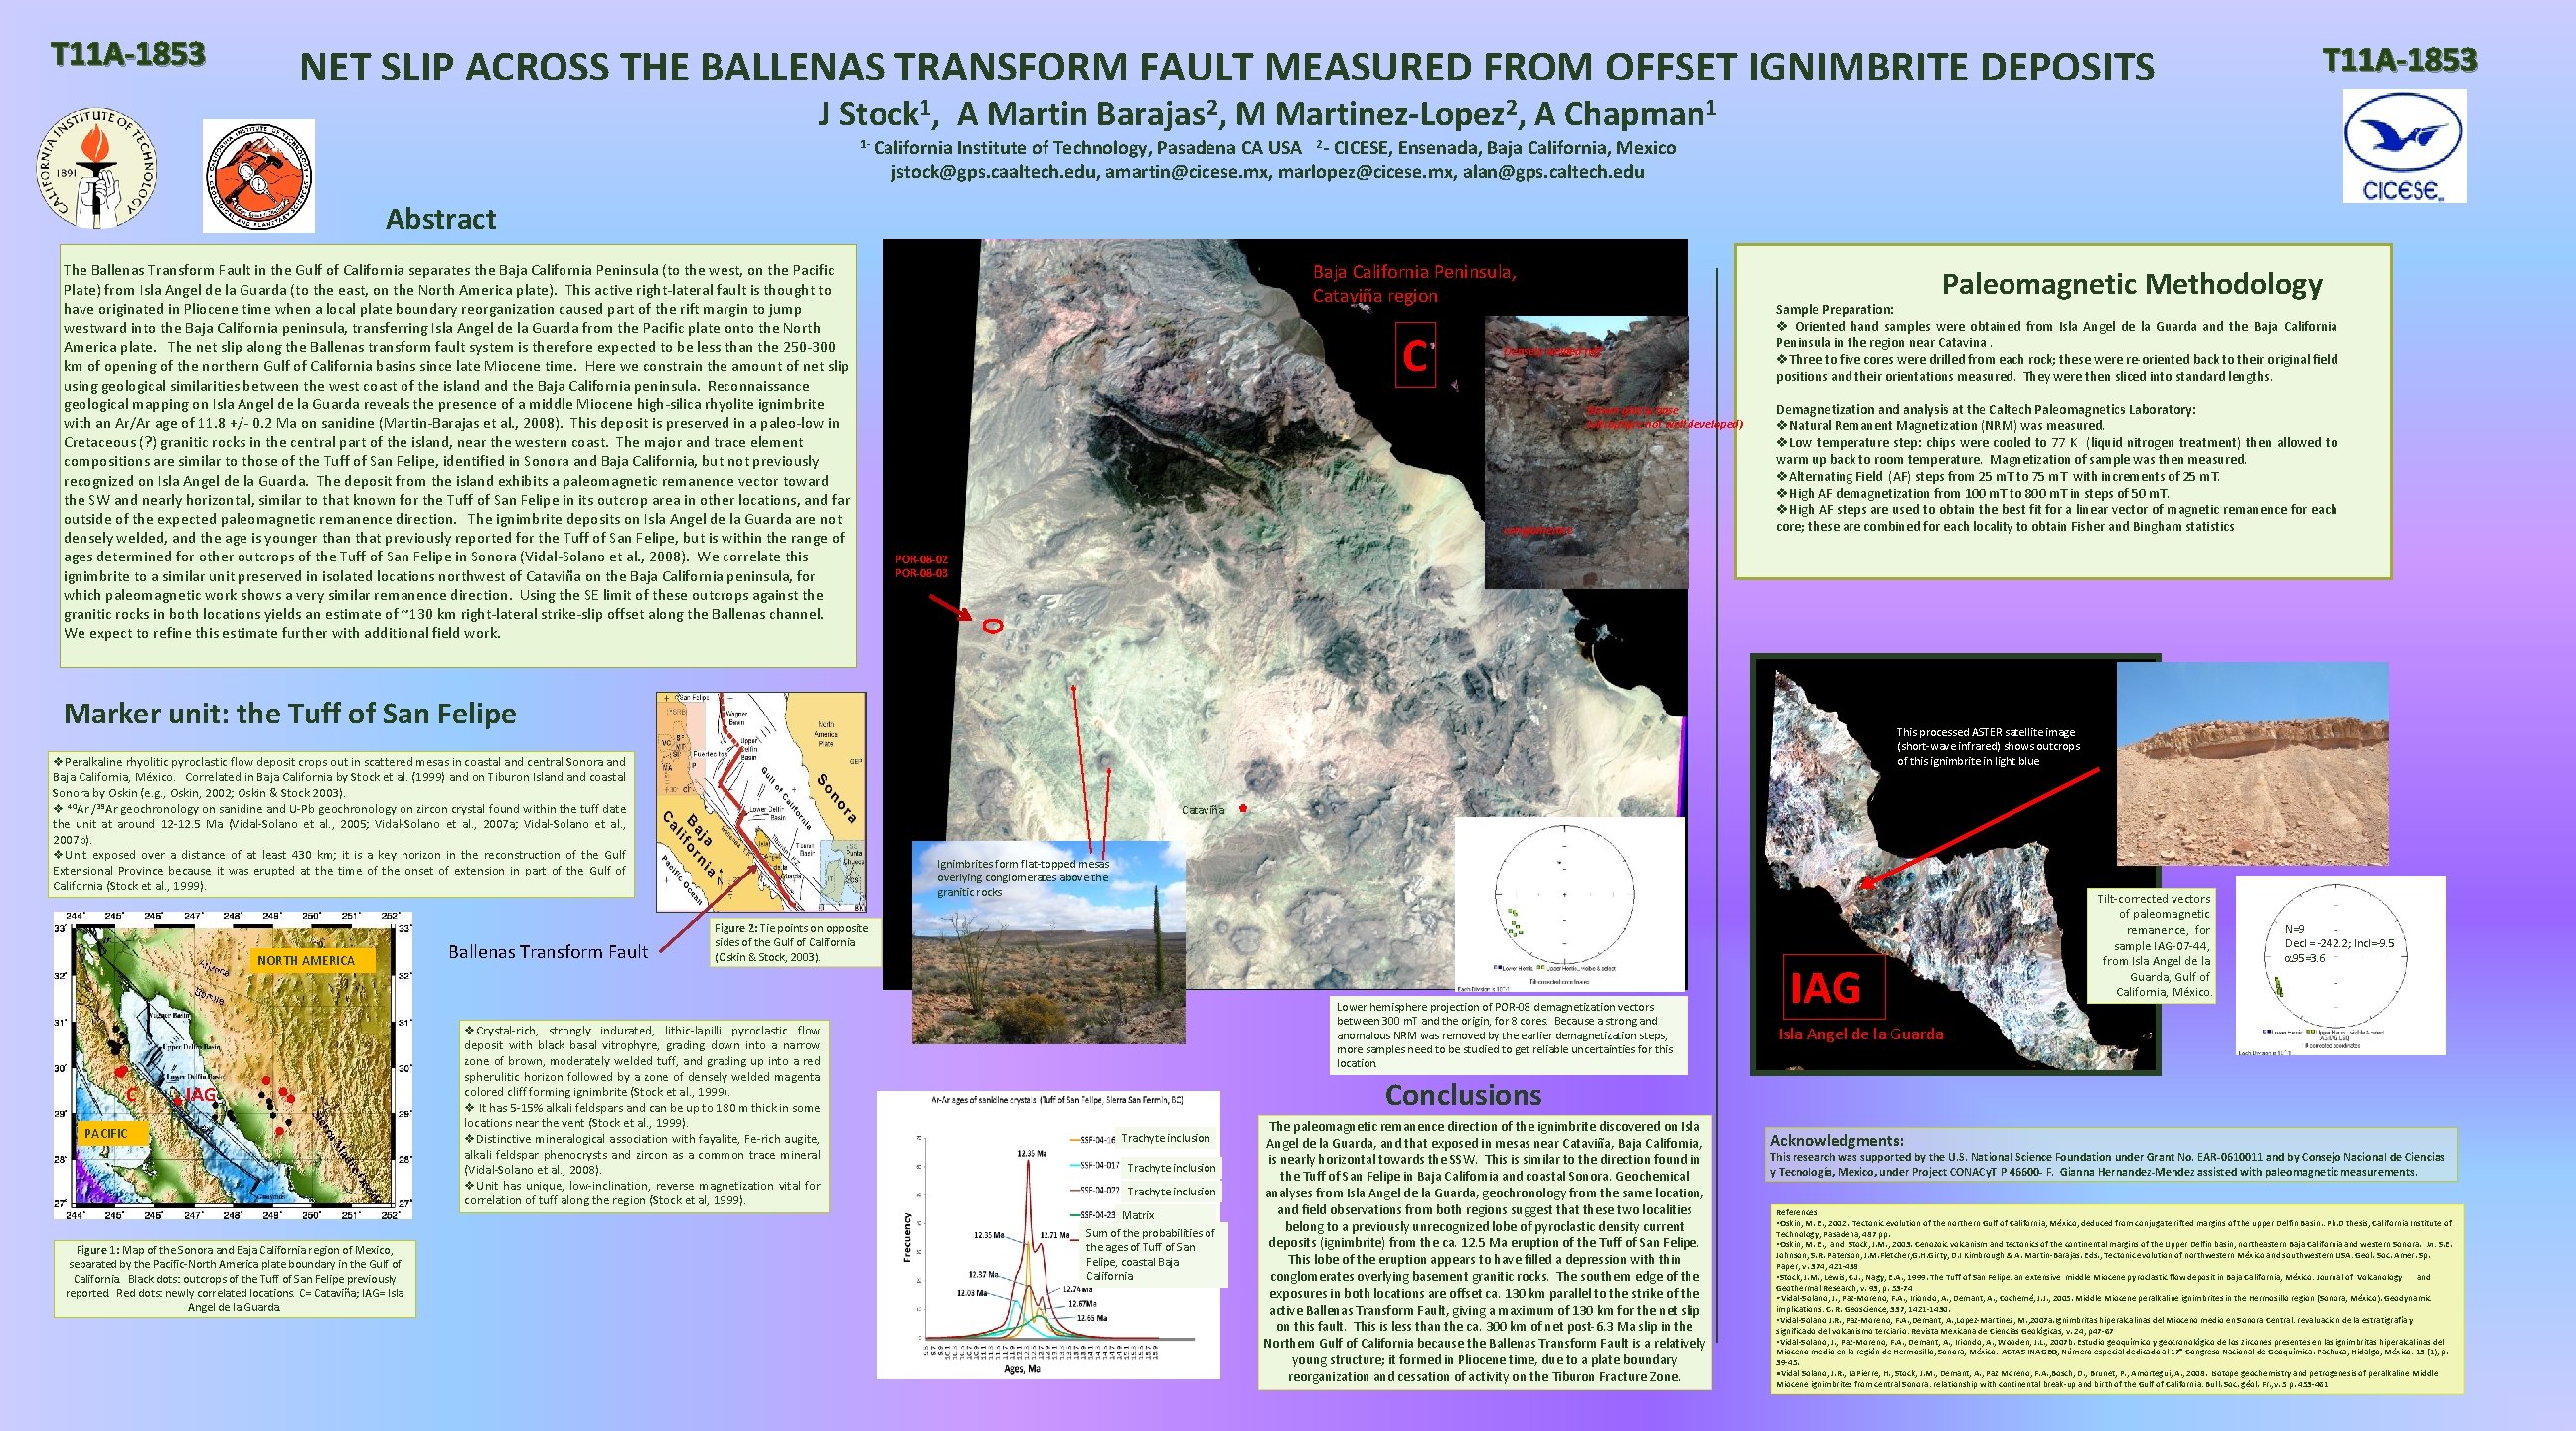 T 11 A-1853 NET SLIP ACROSS THE BALLENAS TRANSFORM FAULT MEASURED FROM OFFSET IGNIMBRITE